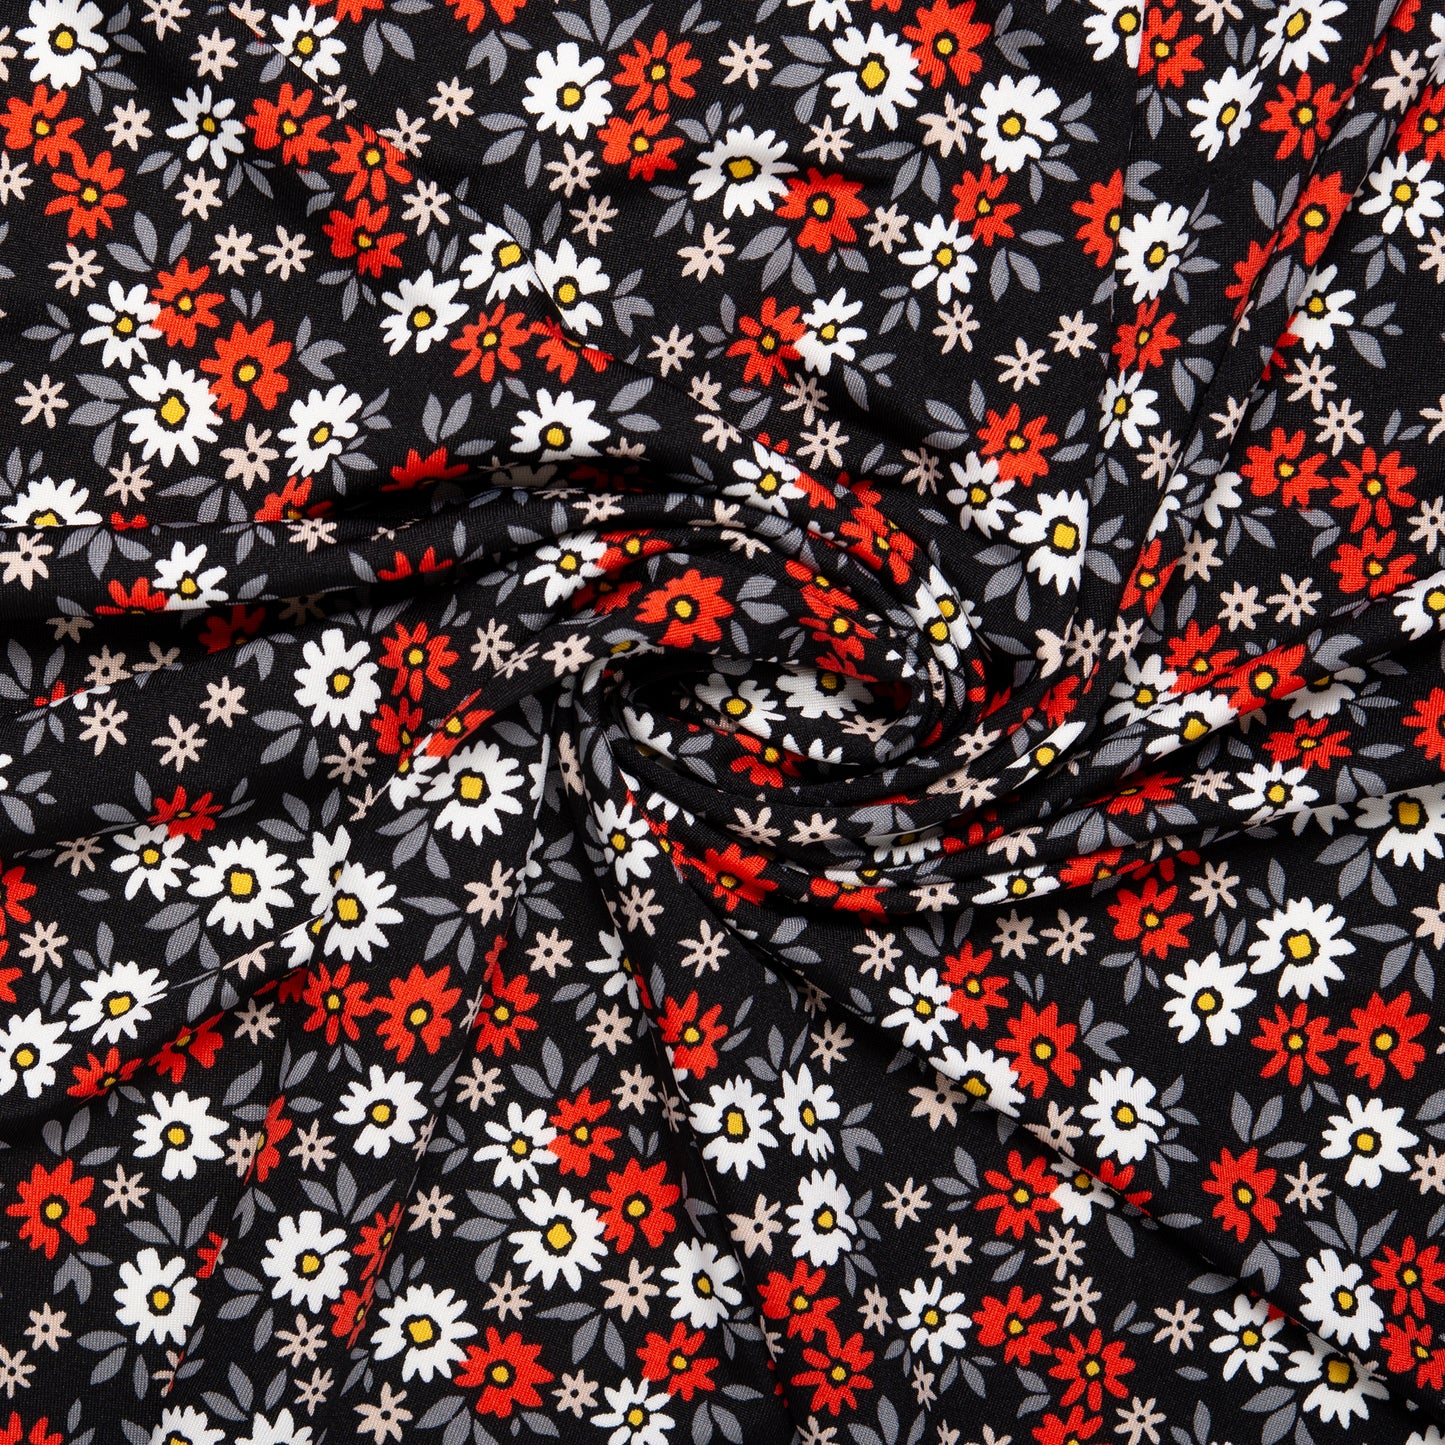 ITY Knit - CHARLOTTE - Daisies - Black / Red